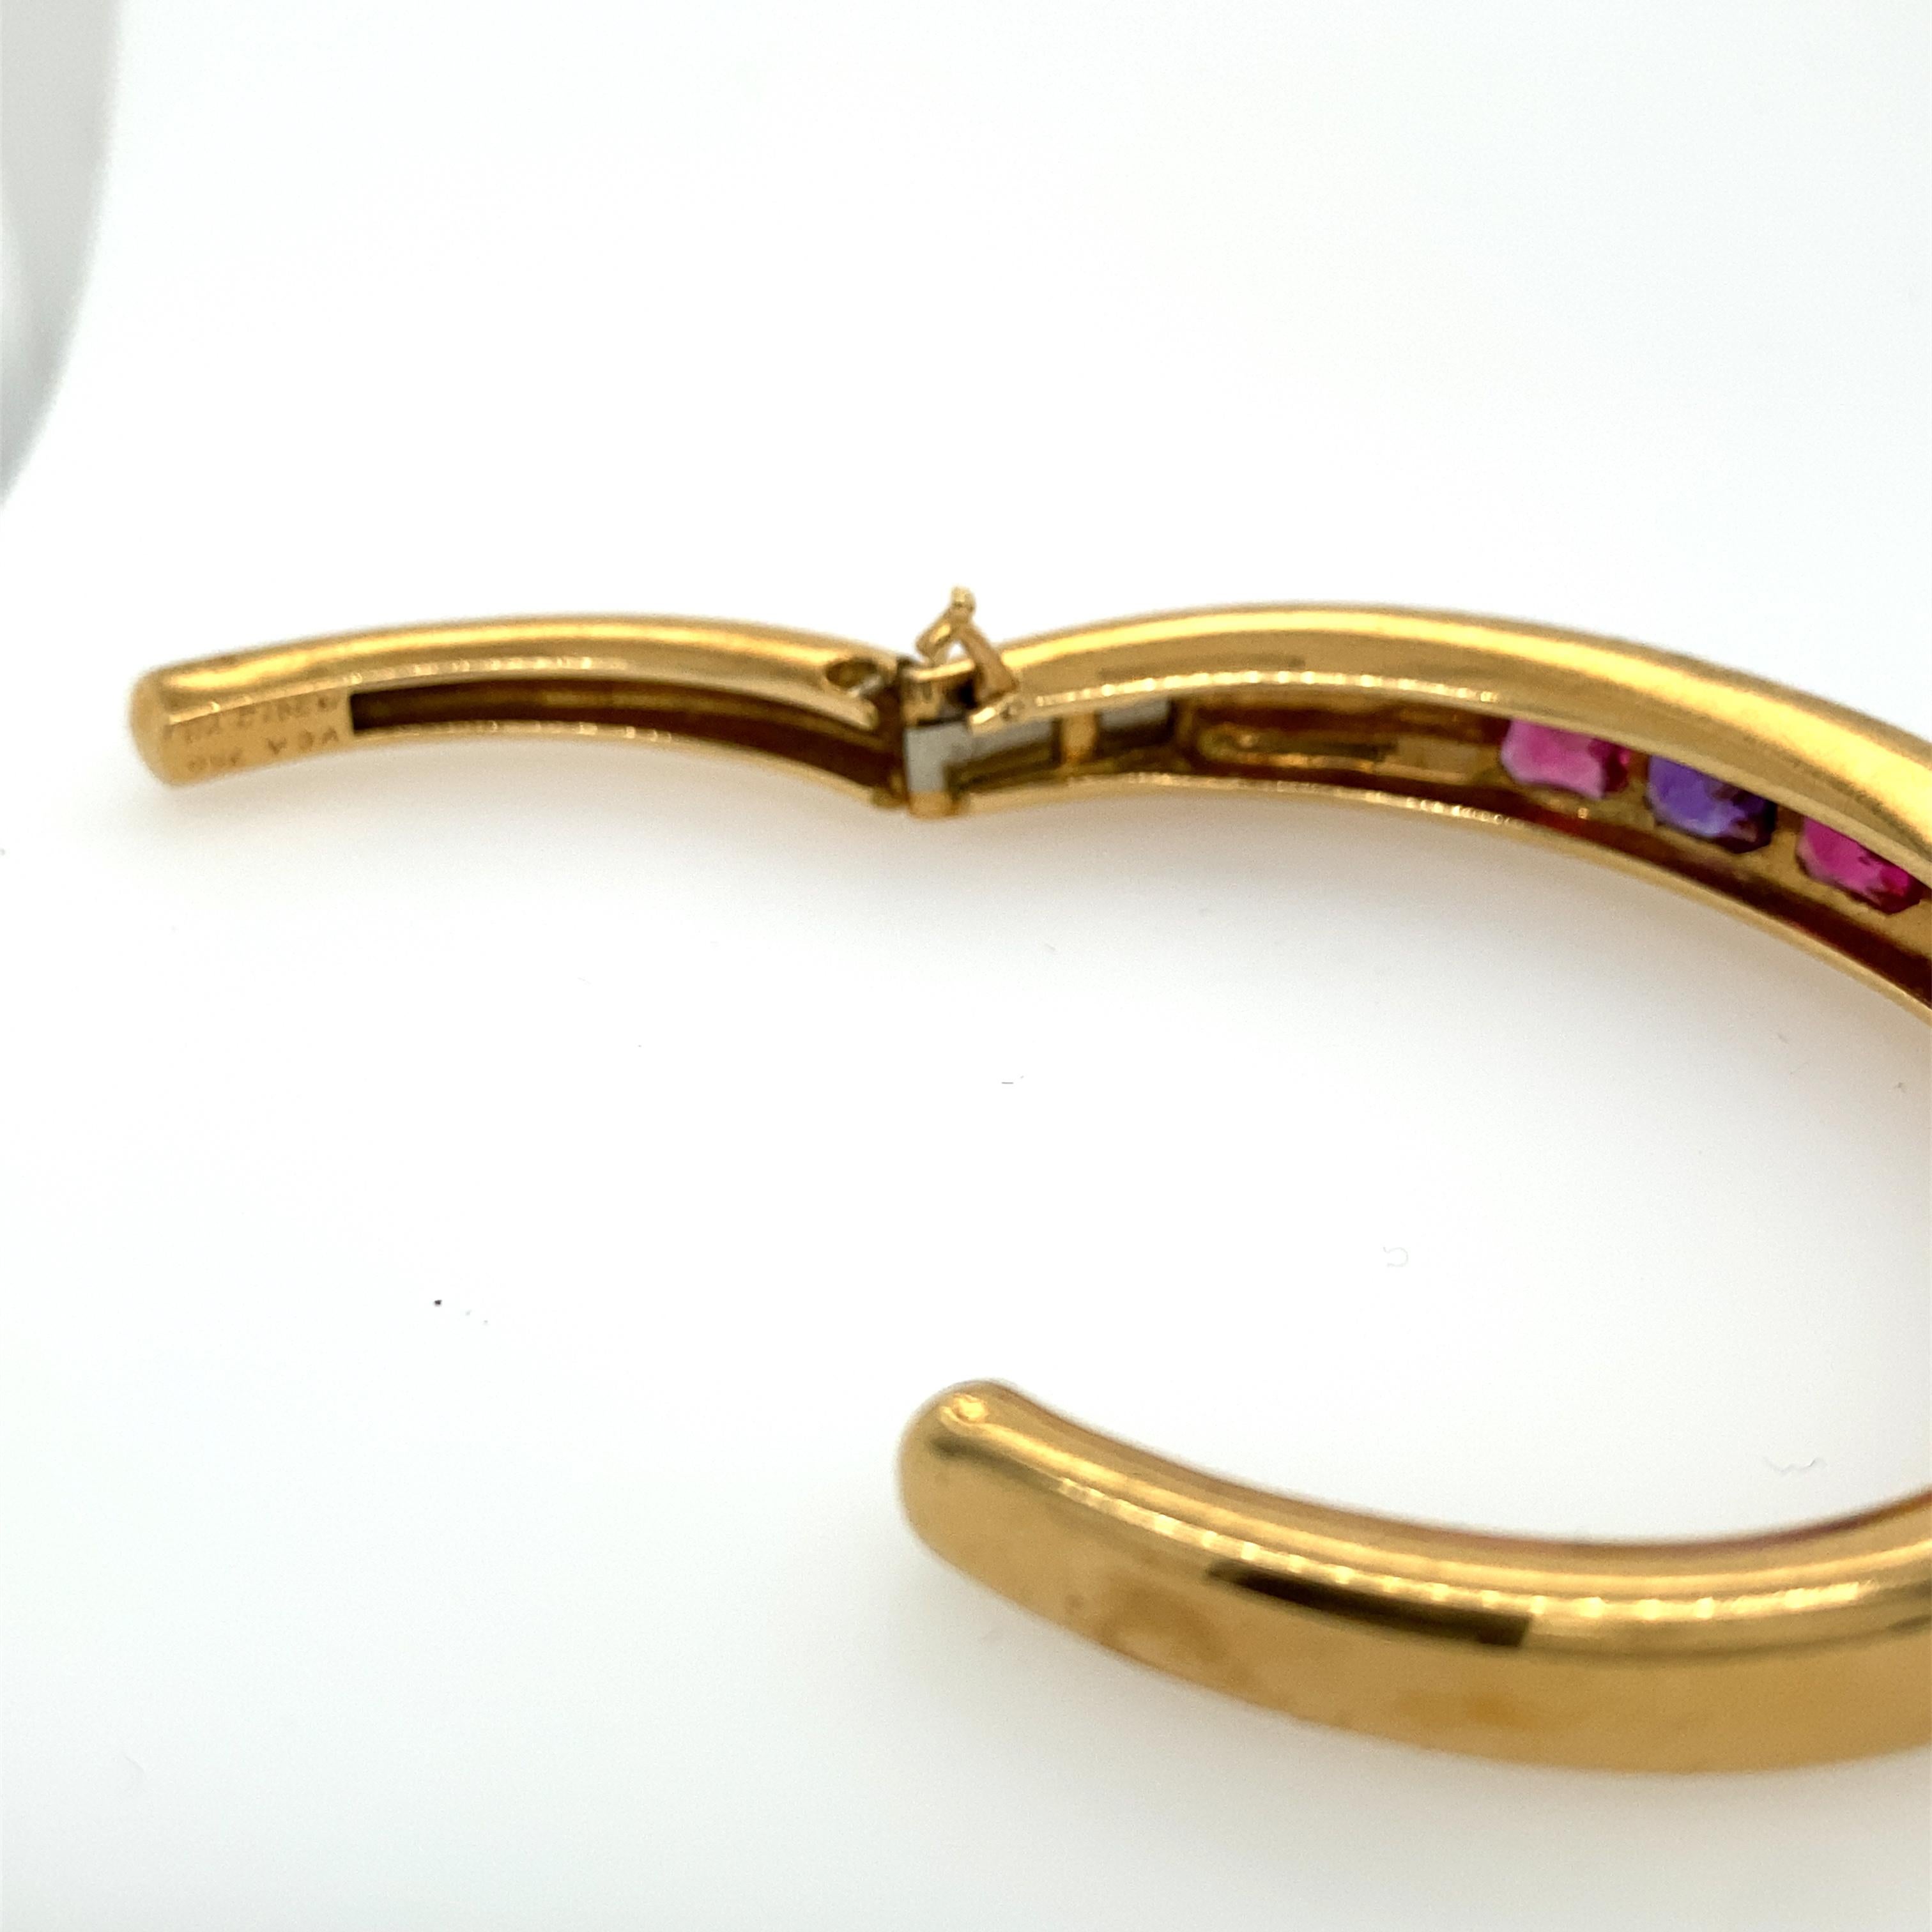 Van Cleef and Arpels 18k Yellow Gold Bracelet with Gem Stones. Van Cleef and Arpels 18k Yellow Gold Bracelet with Gem Stones. There are three square cut pink tourmalines and two square cut amethysts. The bracelet is signed VCA 750 B2612Y1. The